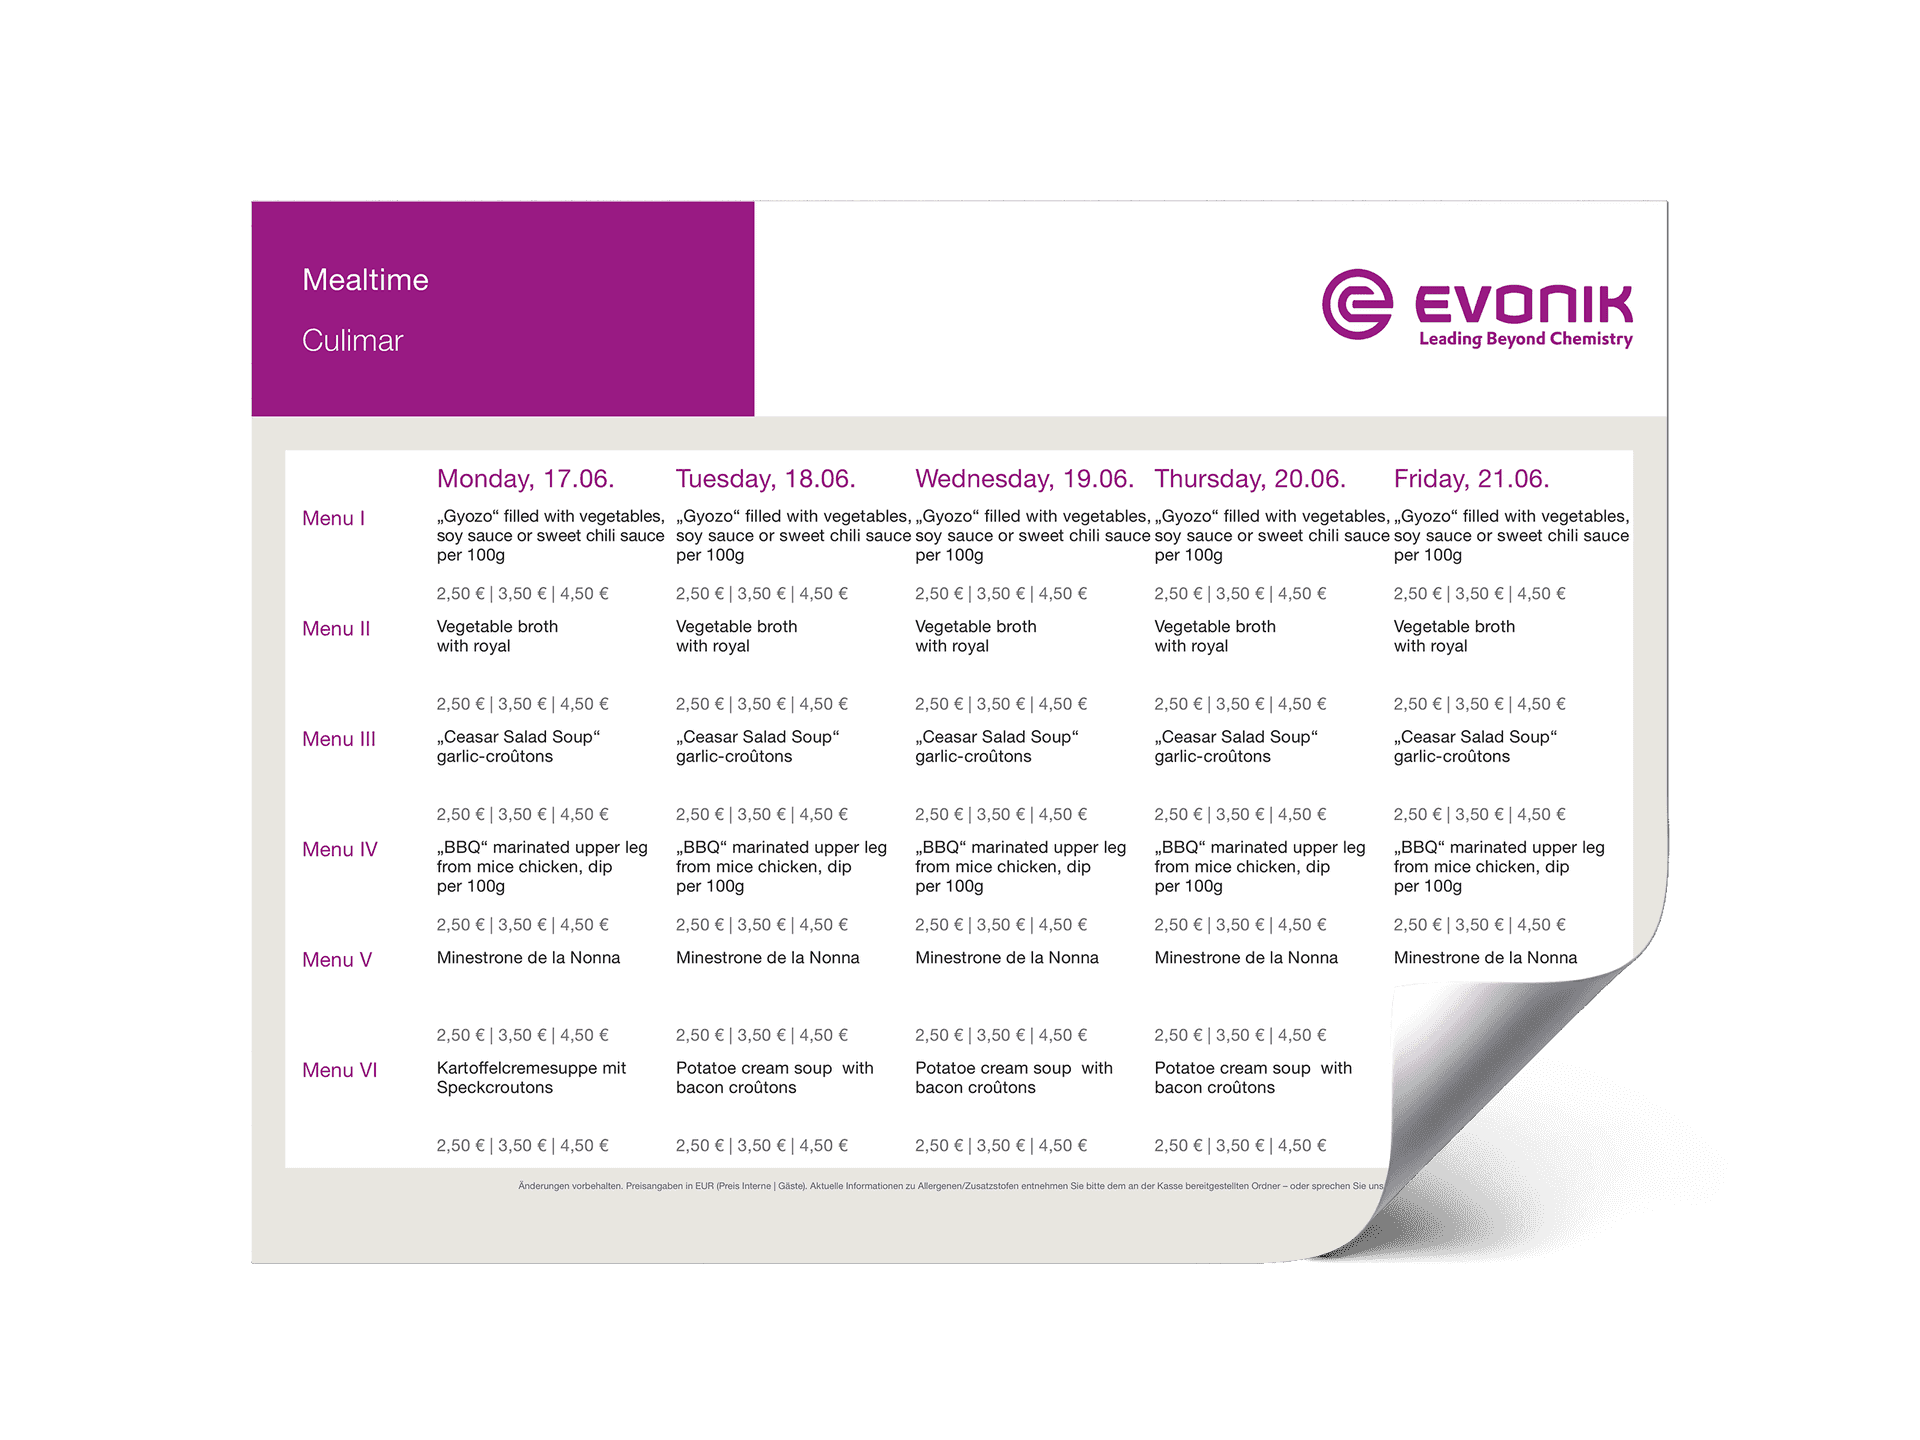 PDF Menu plan of one week from the company Evonik with the dishes and prices